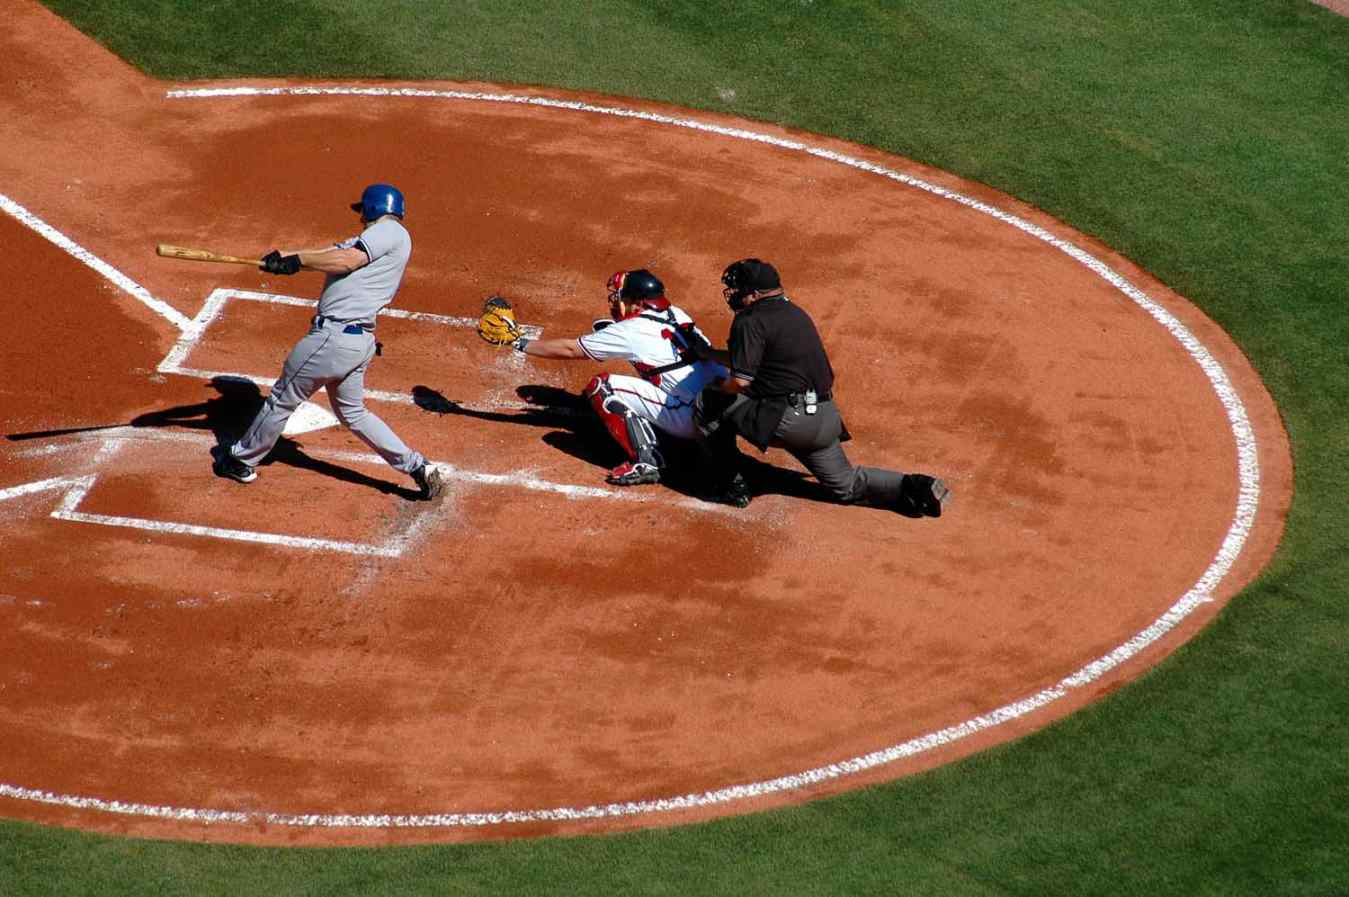 Cleveland Indians Spring Training Schedule and Tickets Released